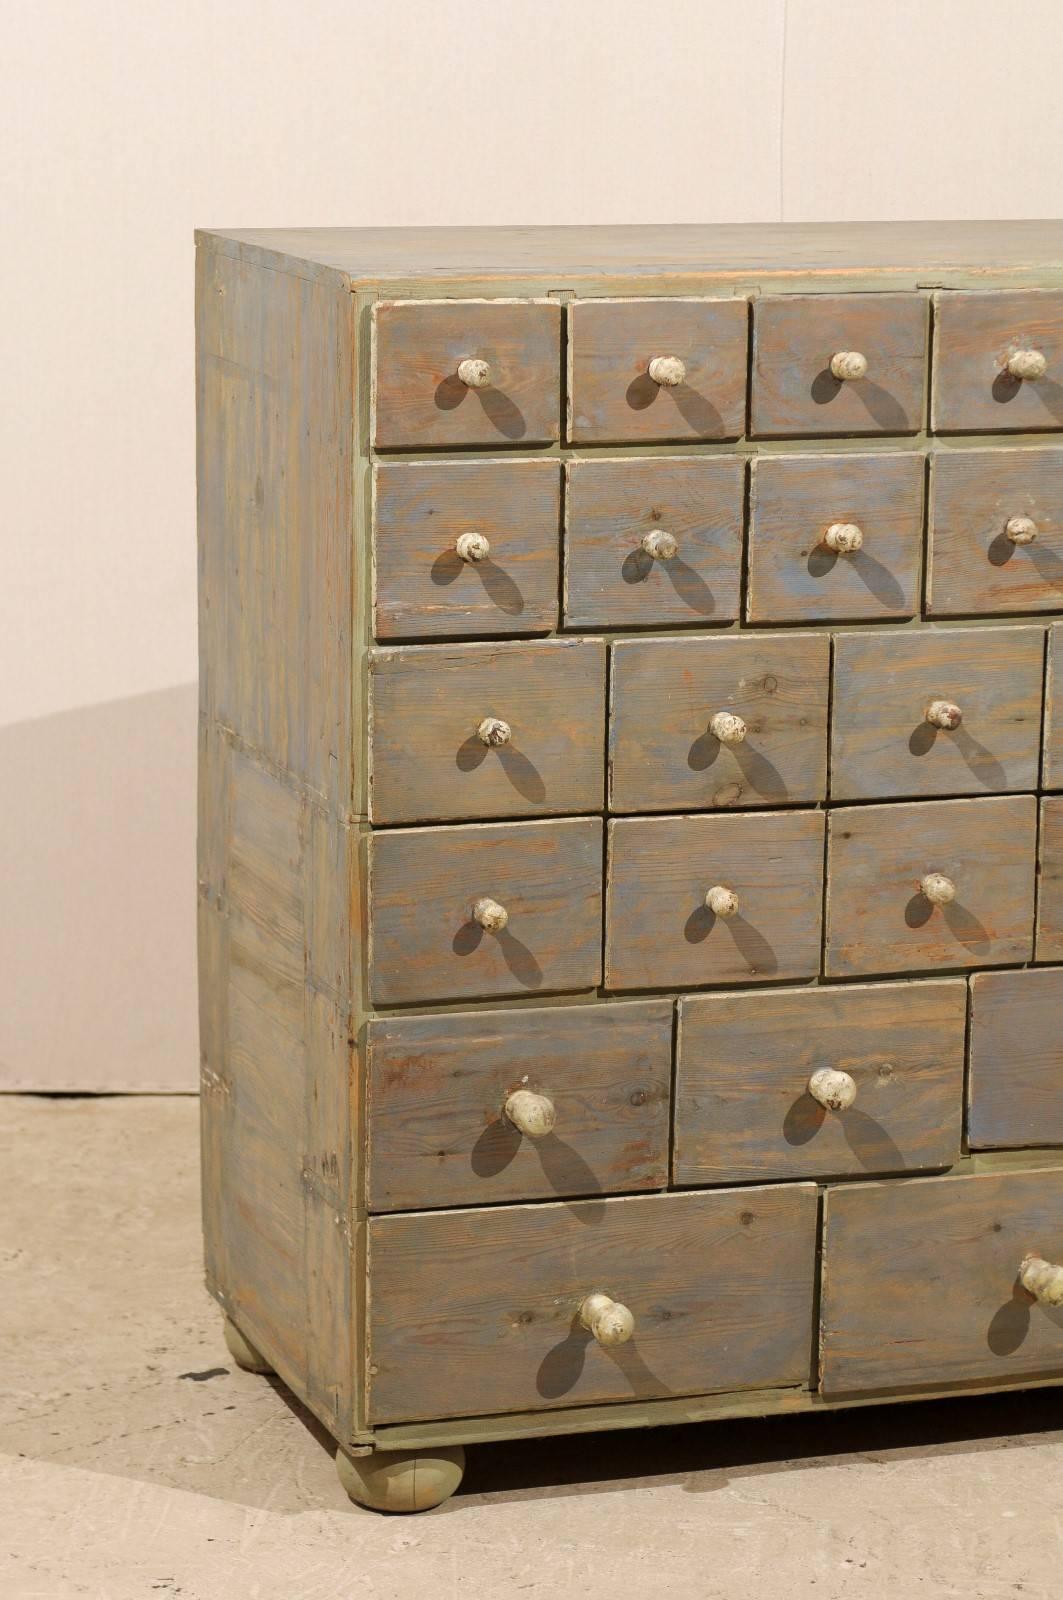 Painted Swedish Apothecary Chest from the 19th Century